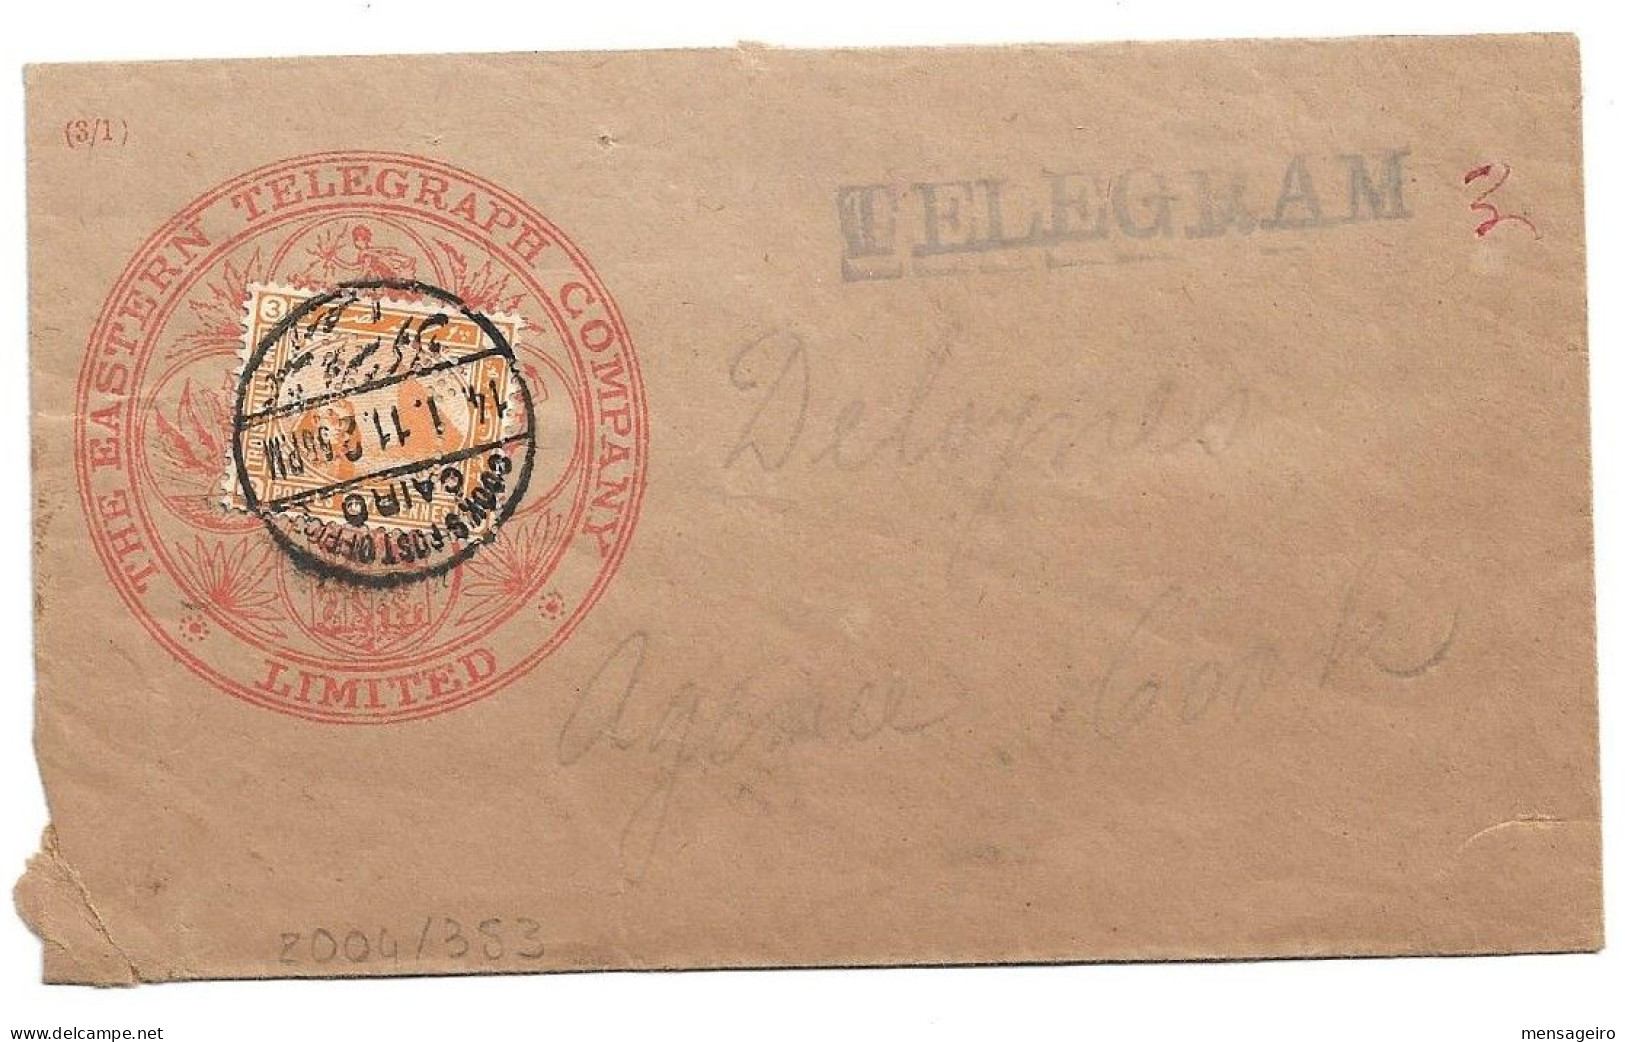 (C04) EASTERN TELEGRAM COVER WITH 3M. STAMP PERFIN "T C/ & S" (INVERTED) - COOKS POST OFFICE / CAIRO => COOK AGENCY - 1866-1914 Khedivato De Egipto